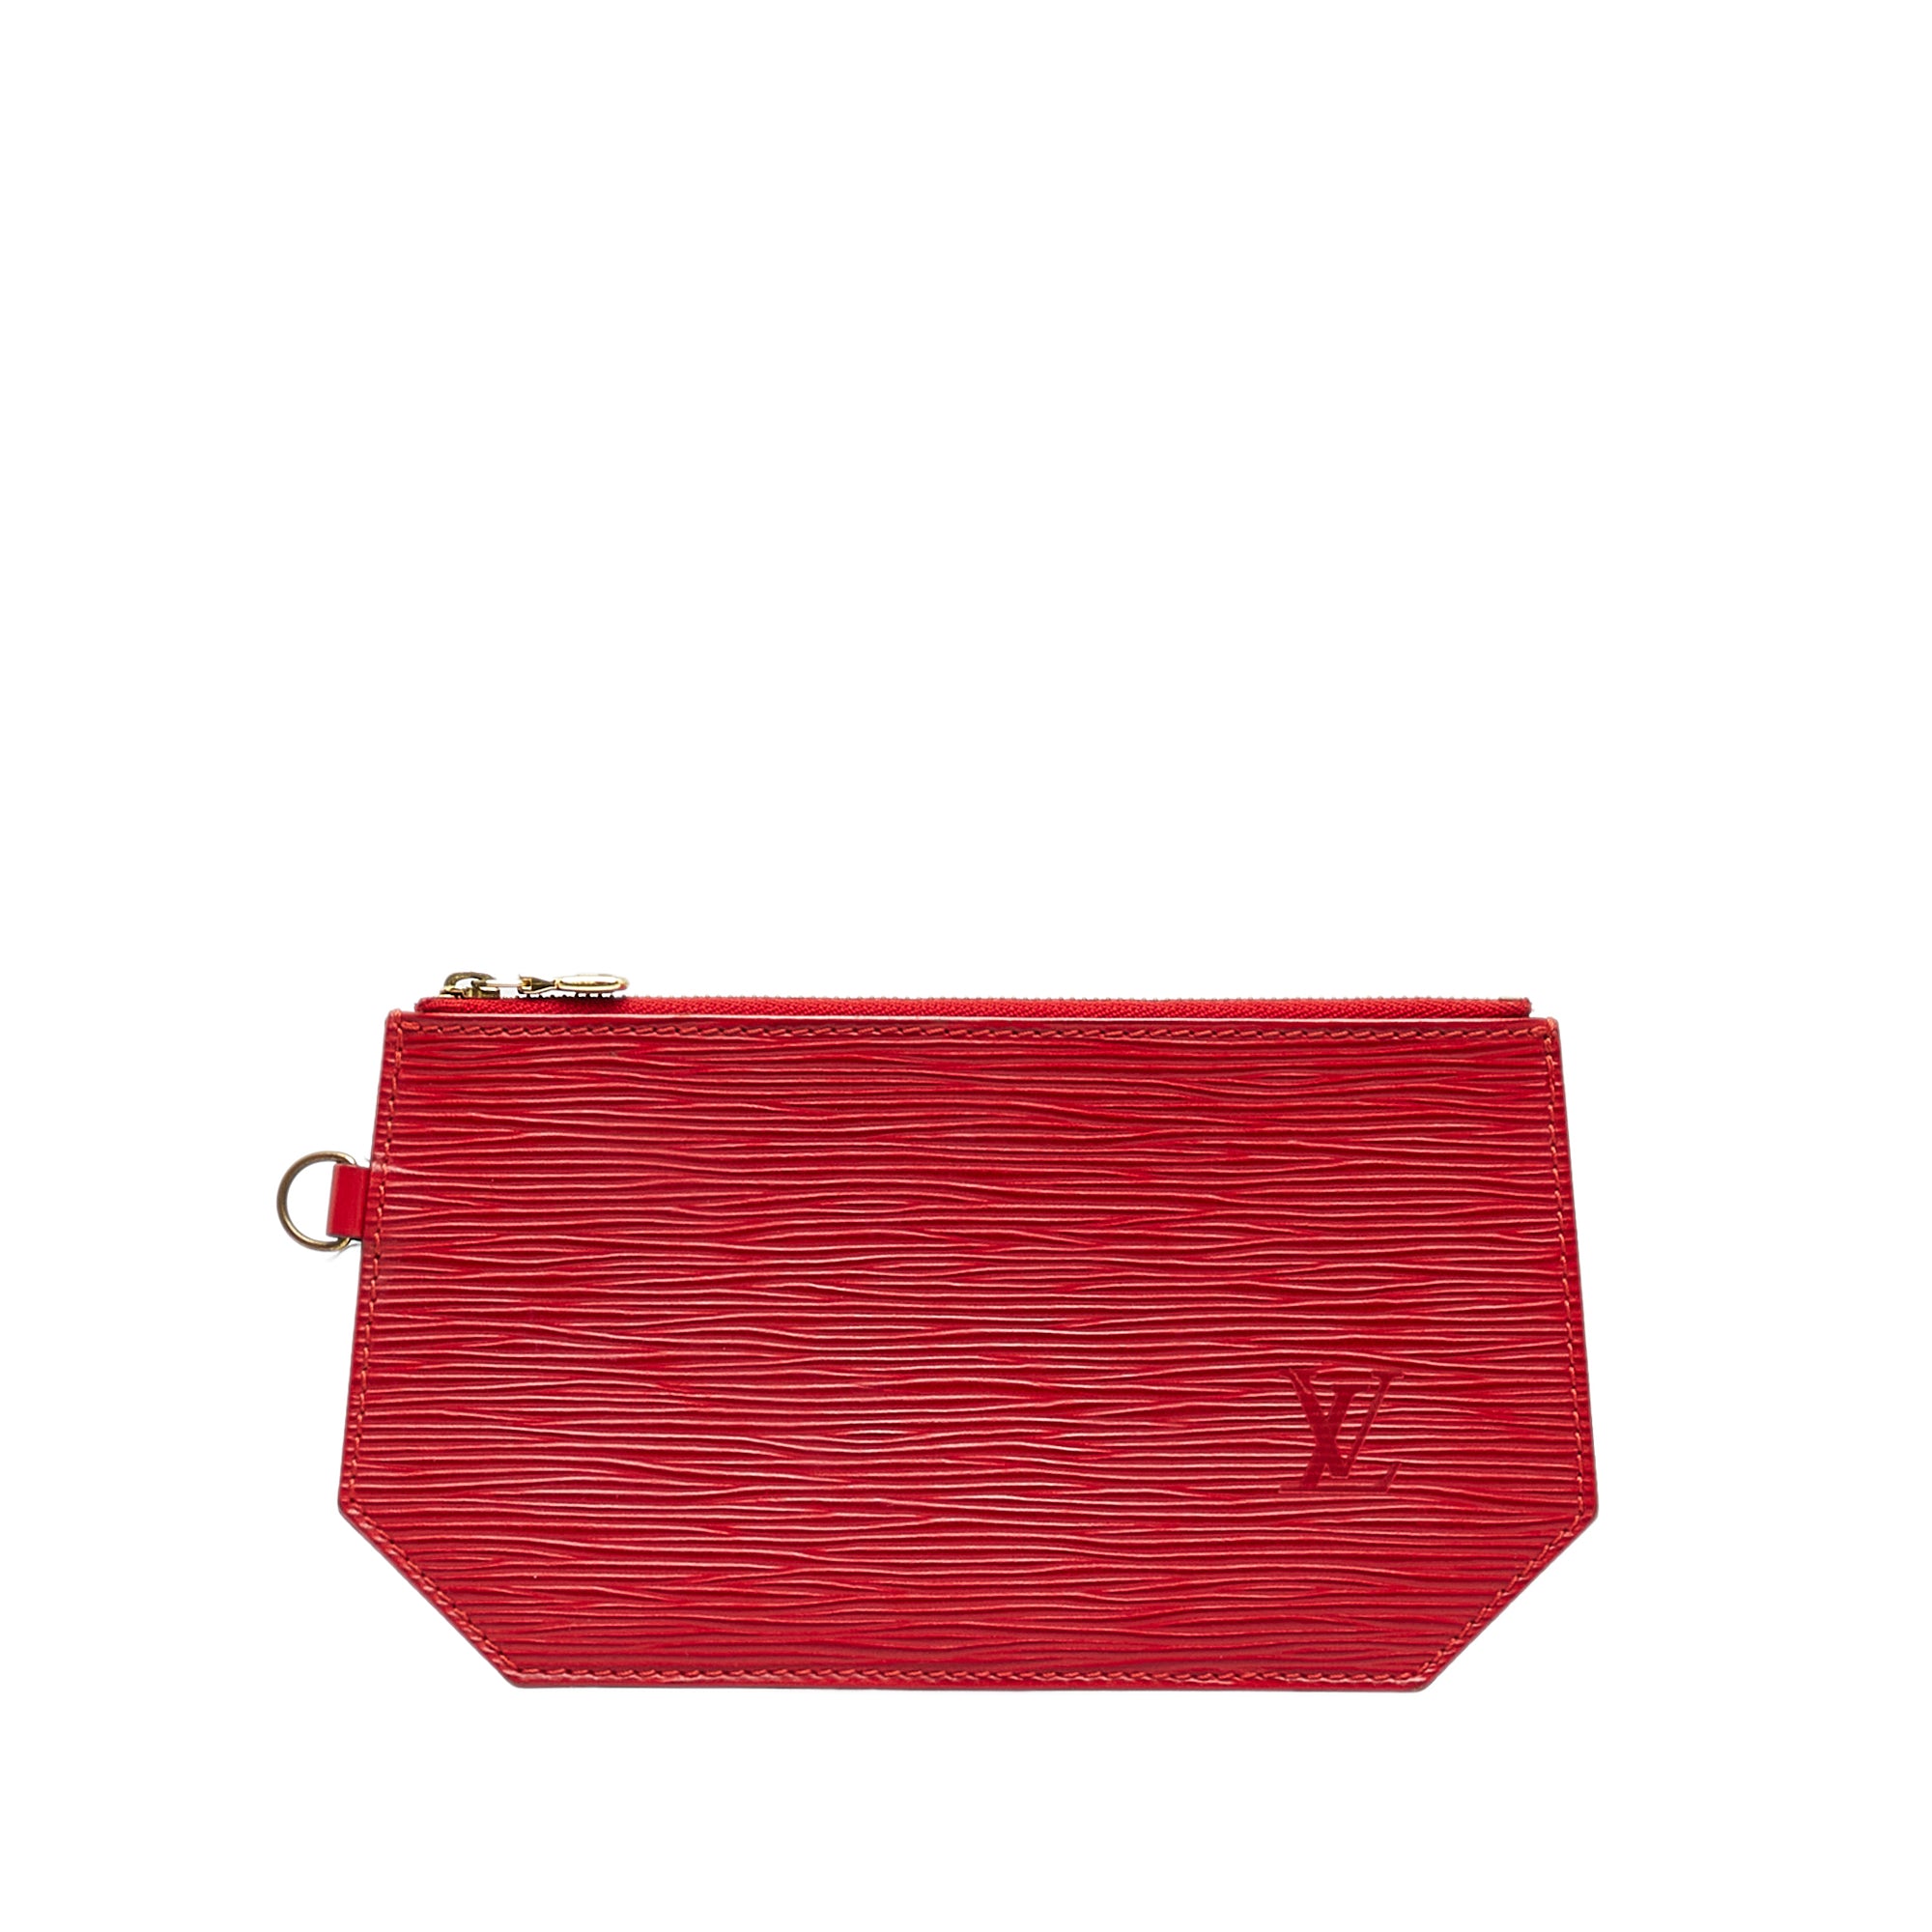 Louis Vuitton - Zippy Wallet - Red Epi Leather - SHW - Pre Loved